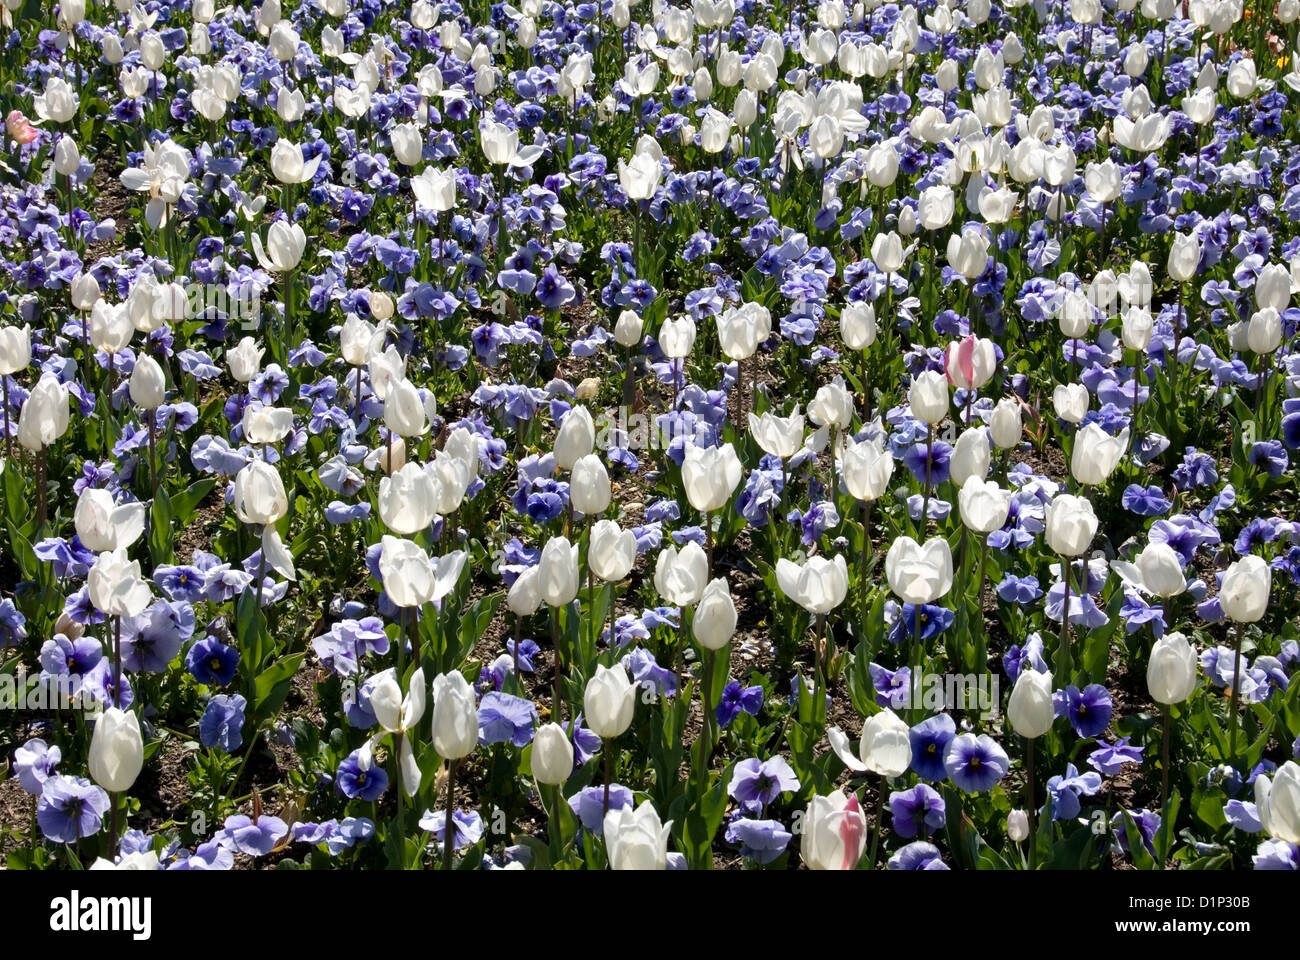 A mass display of blue Pansies and white Tulips at Floriade, Canberra, Australia Stock Photo